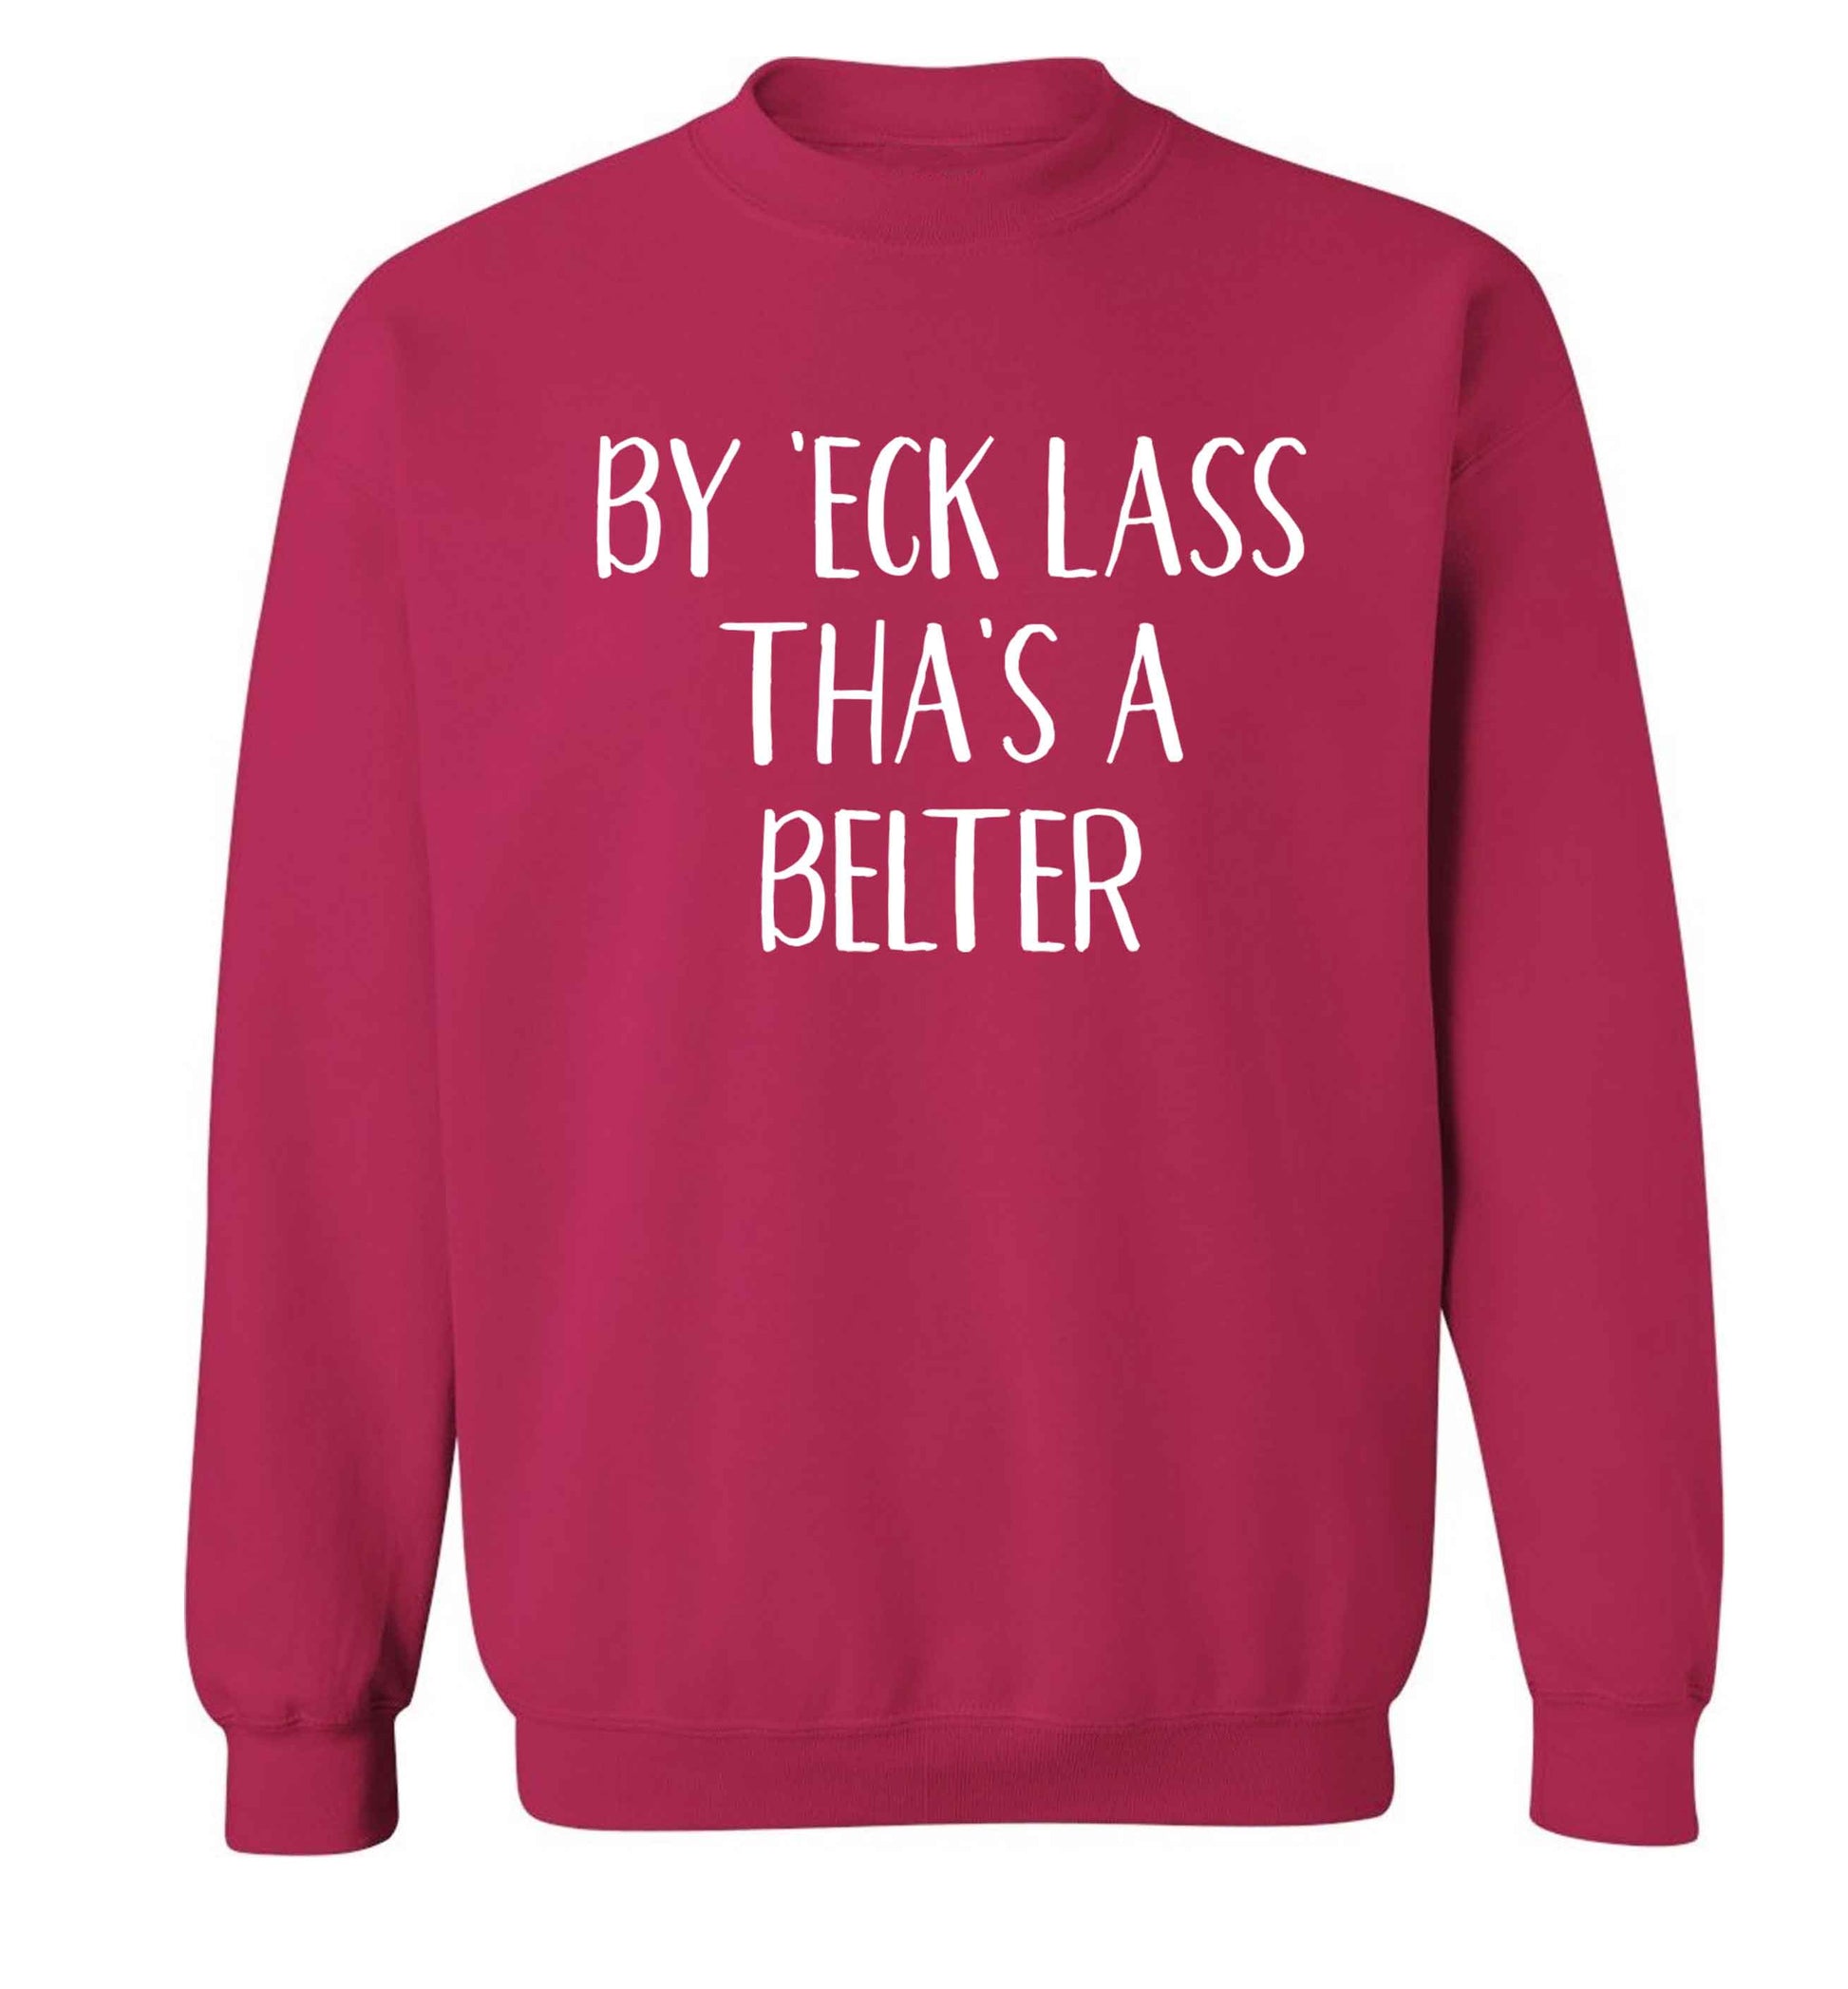 Be 'eck lass tha's a belter Adult's unisex pink Sweater 2XL